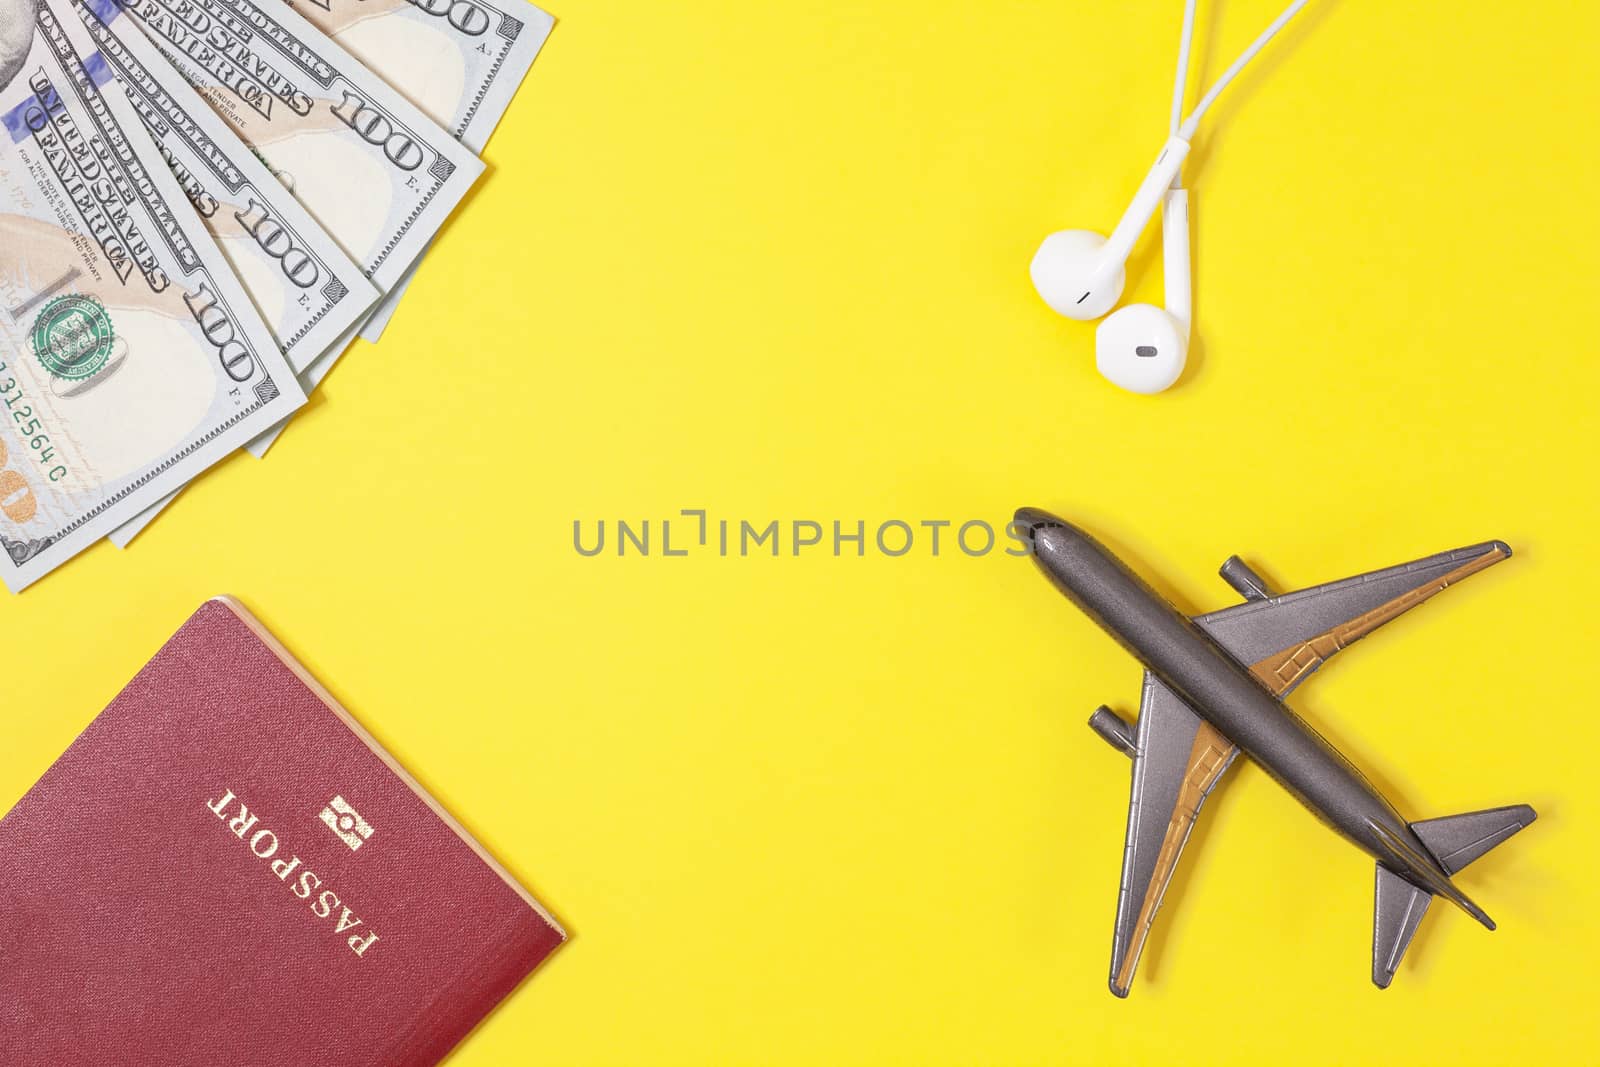 One hundred dollar bills, airplane, headphones, foreign passport on bright yellow paper background. Copy space. Travel and business concept, flat lay. Hand luggage, minimalism, frame of objects